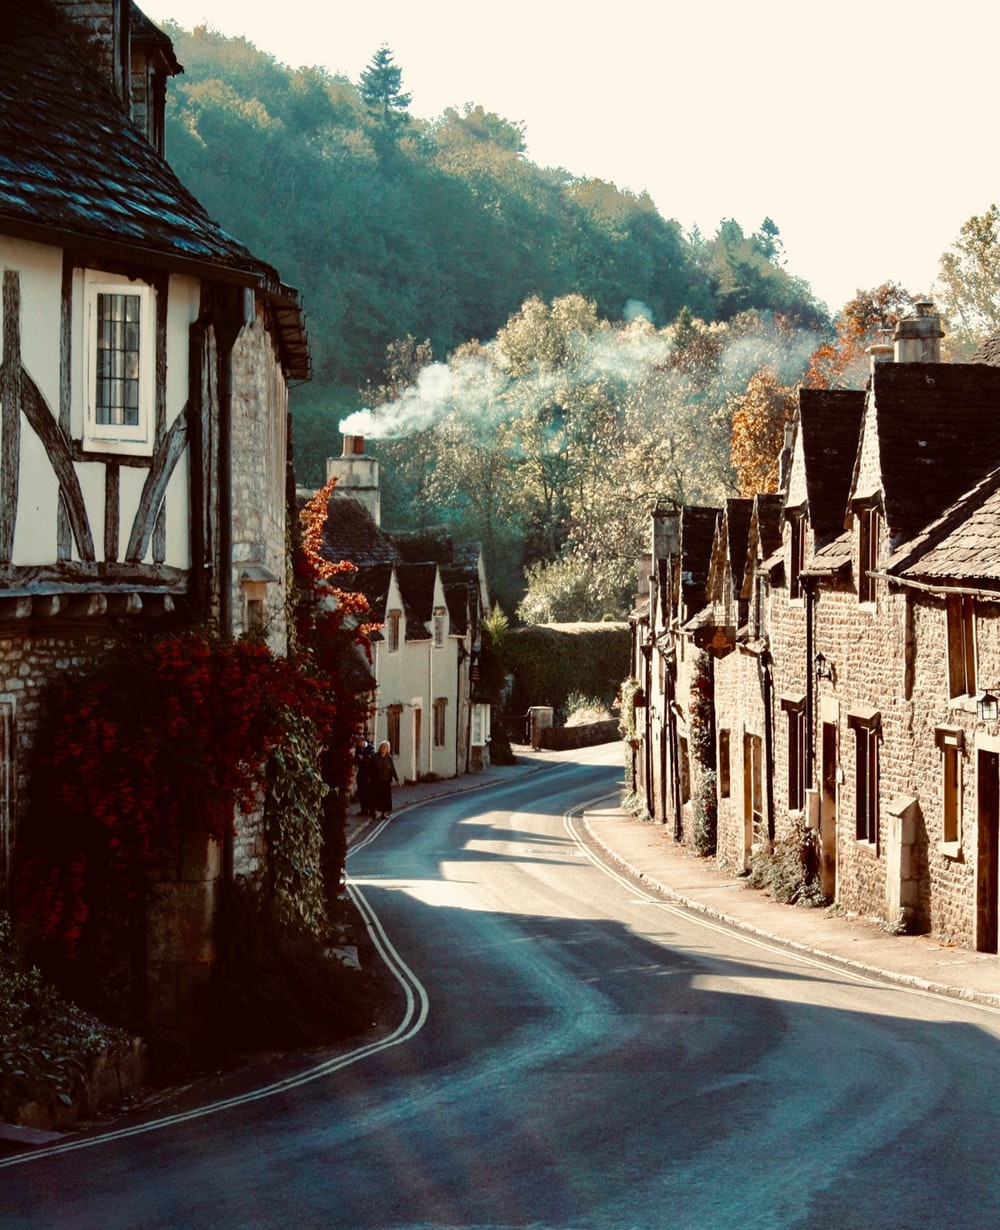 English Village Pictures Download Free Images on